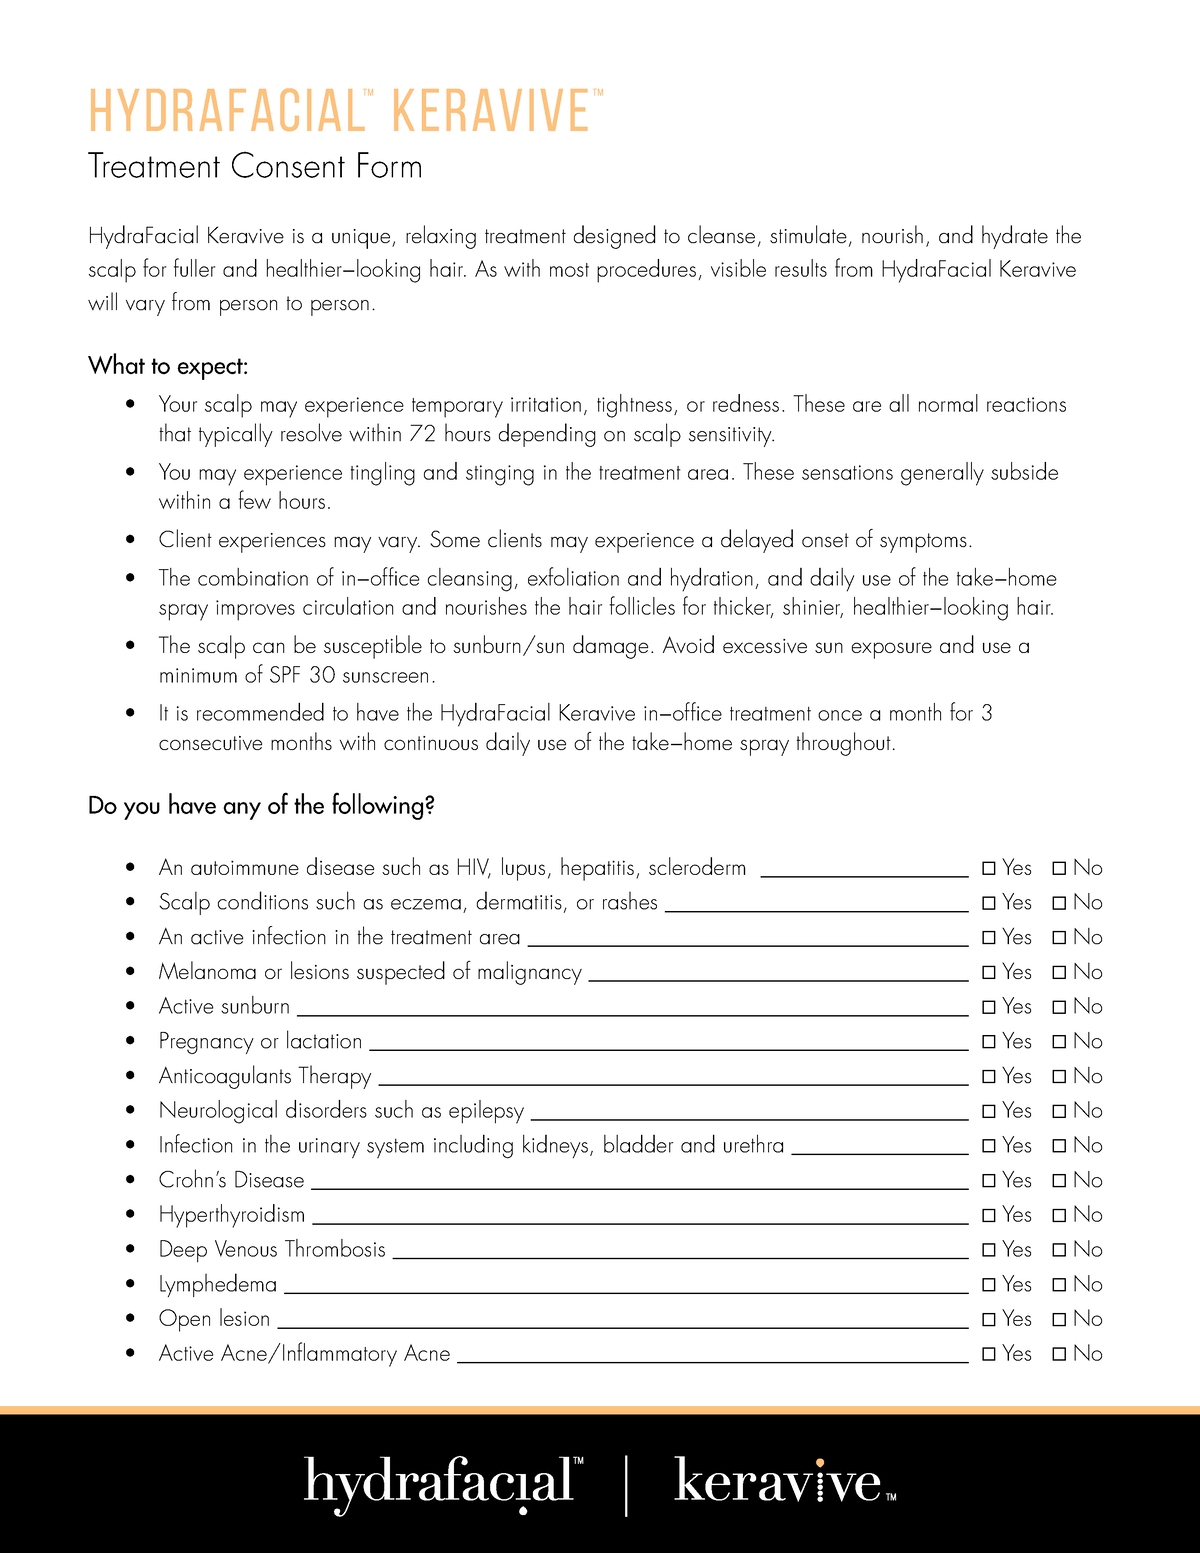 908 Keravive Consent Form Final - HydraFacial Keravive is a unique,  relaxing treatment designed to - Studocu